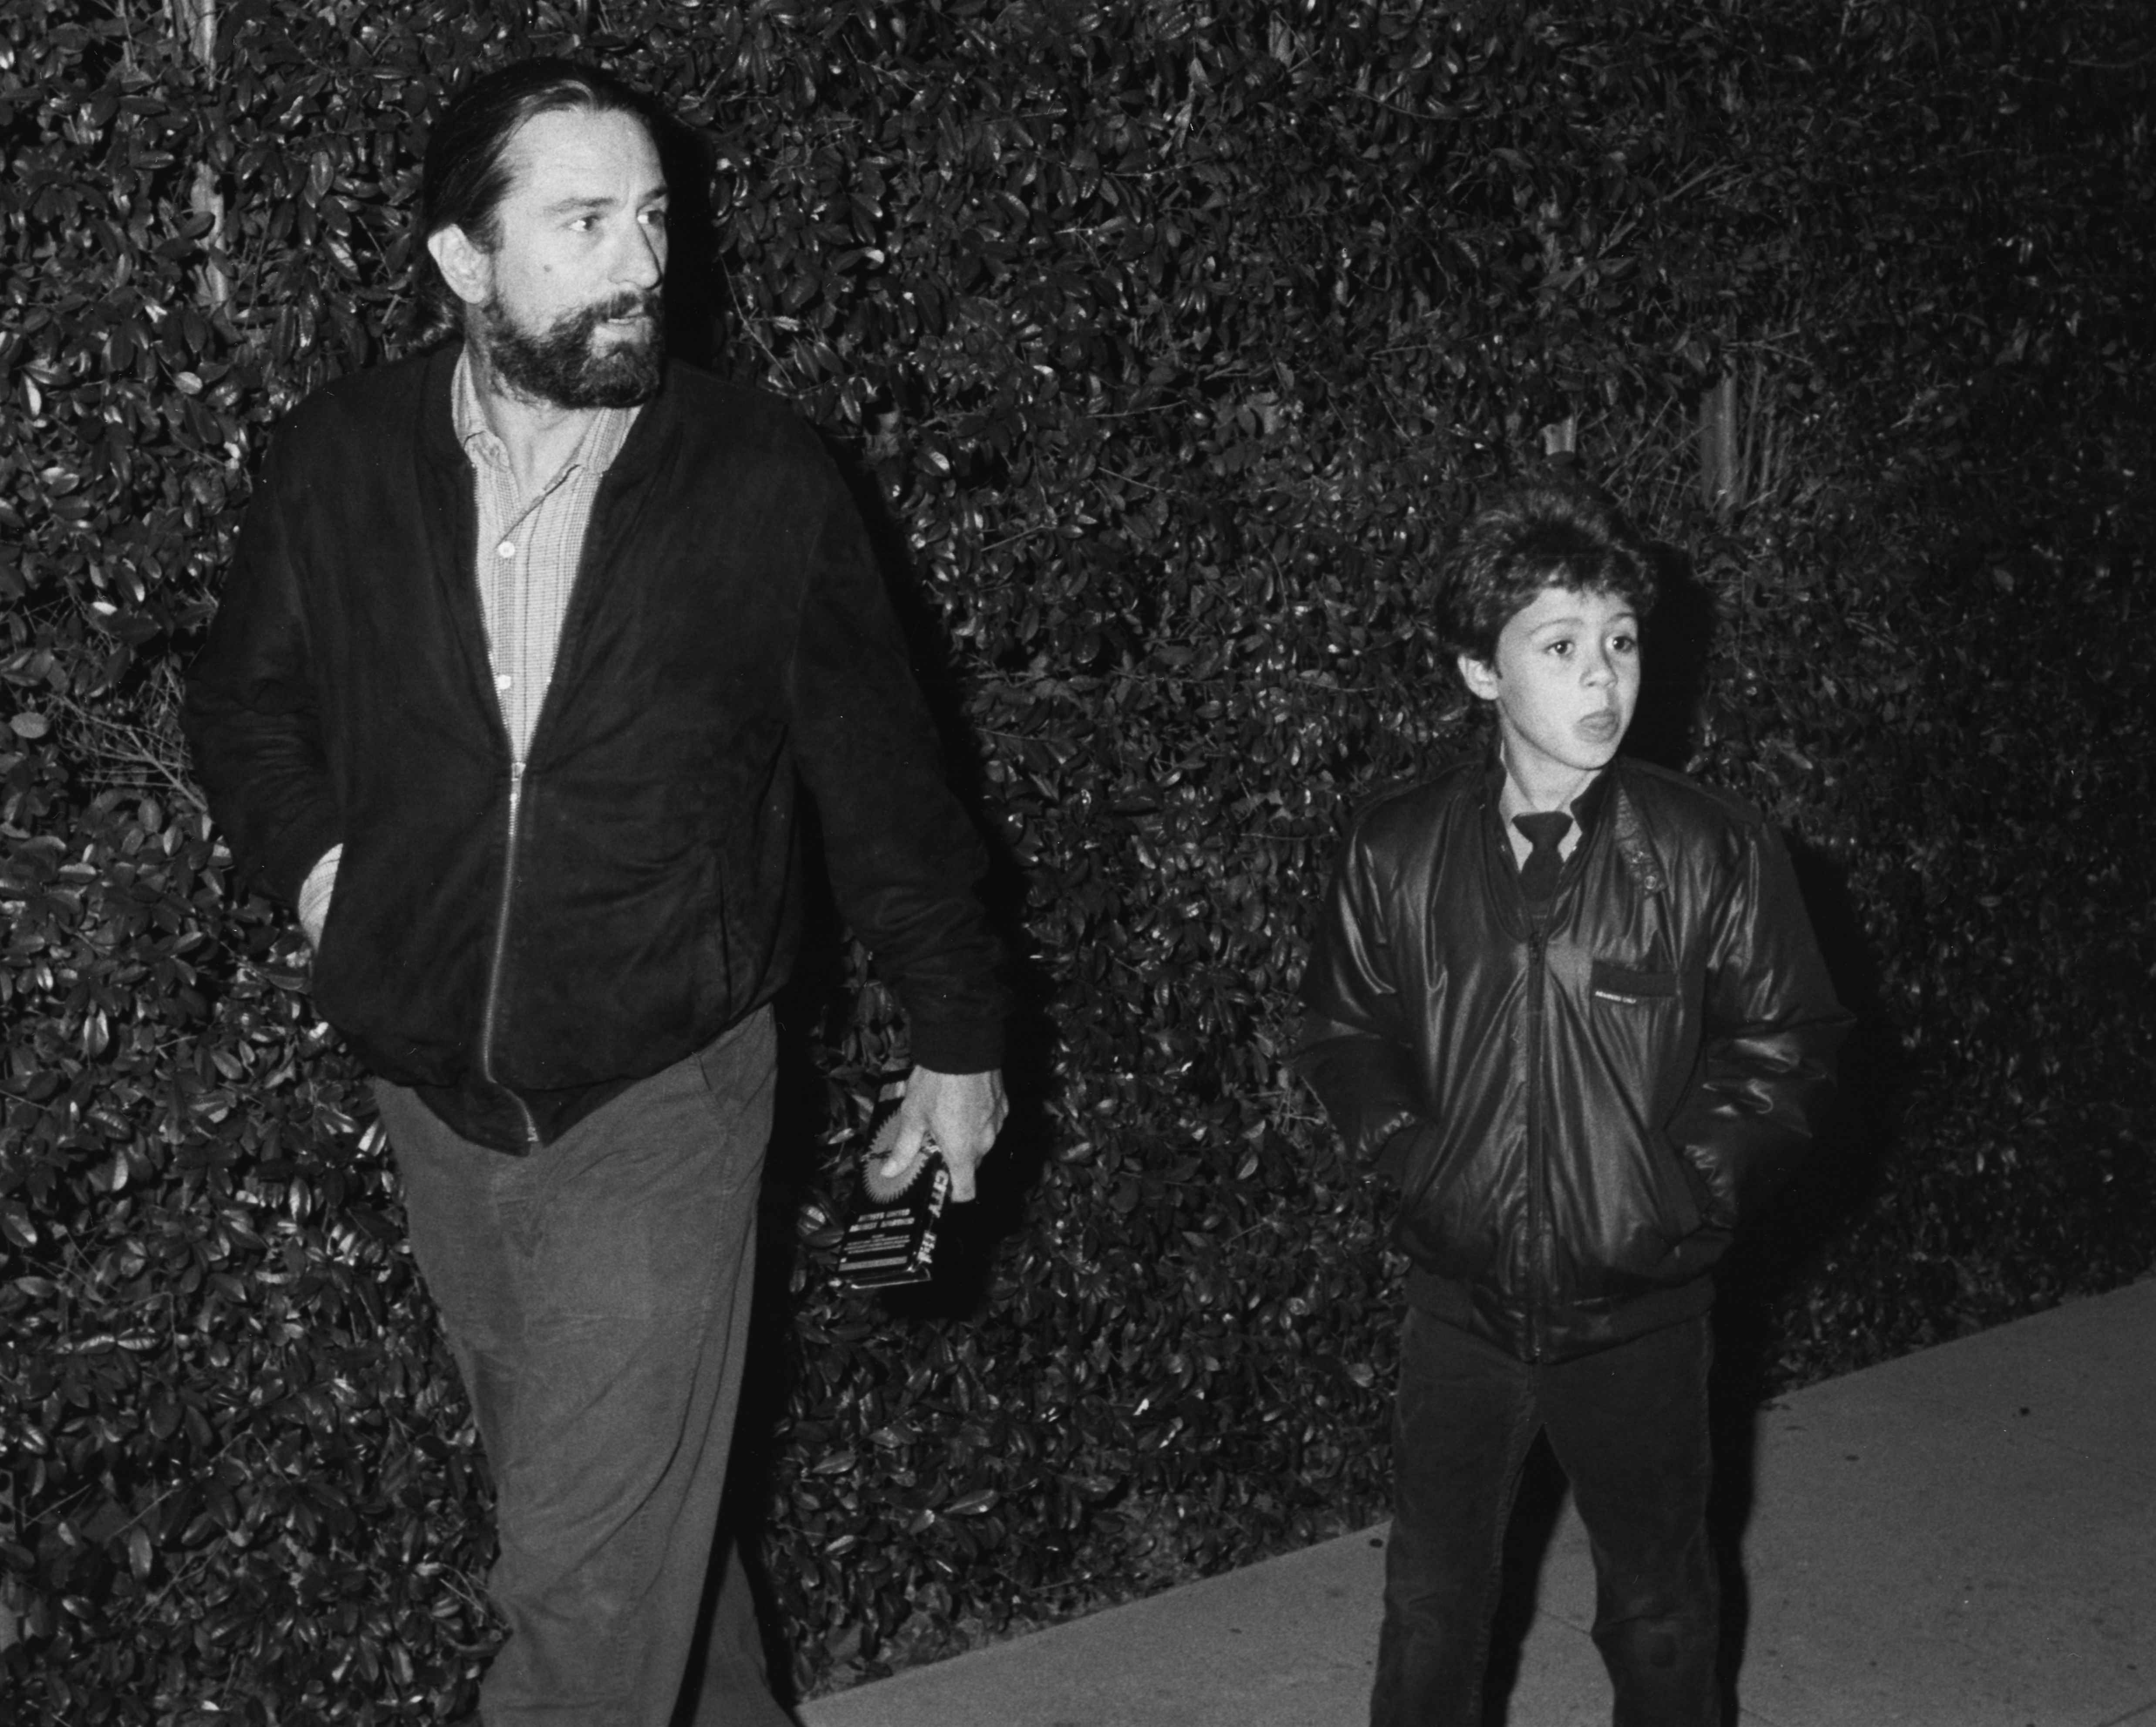 Robert De Niro and his son in Santa Monica, CA, on January 25, 1986. | Source: Getty Images